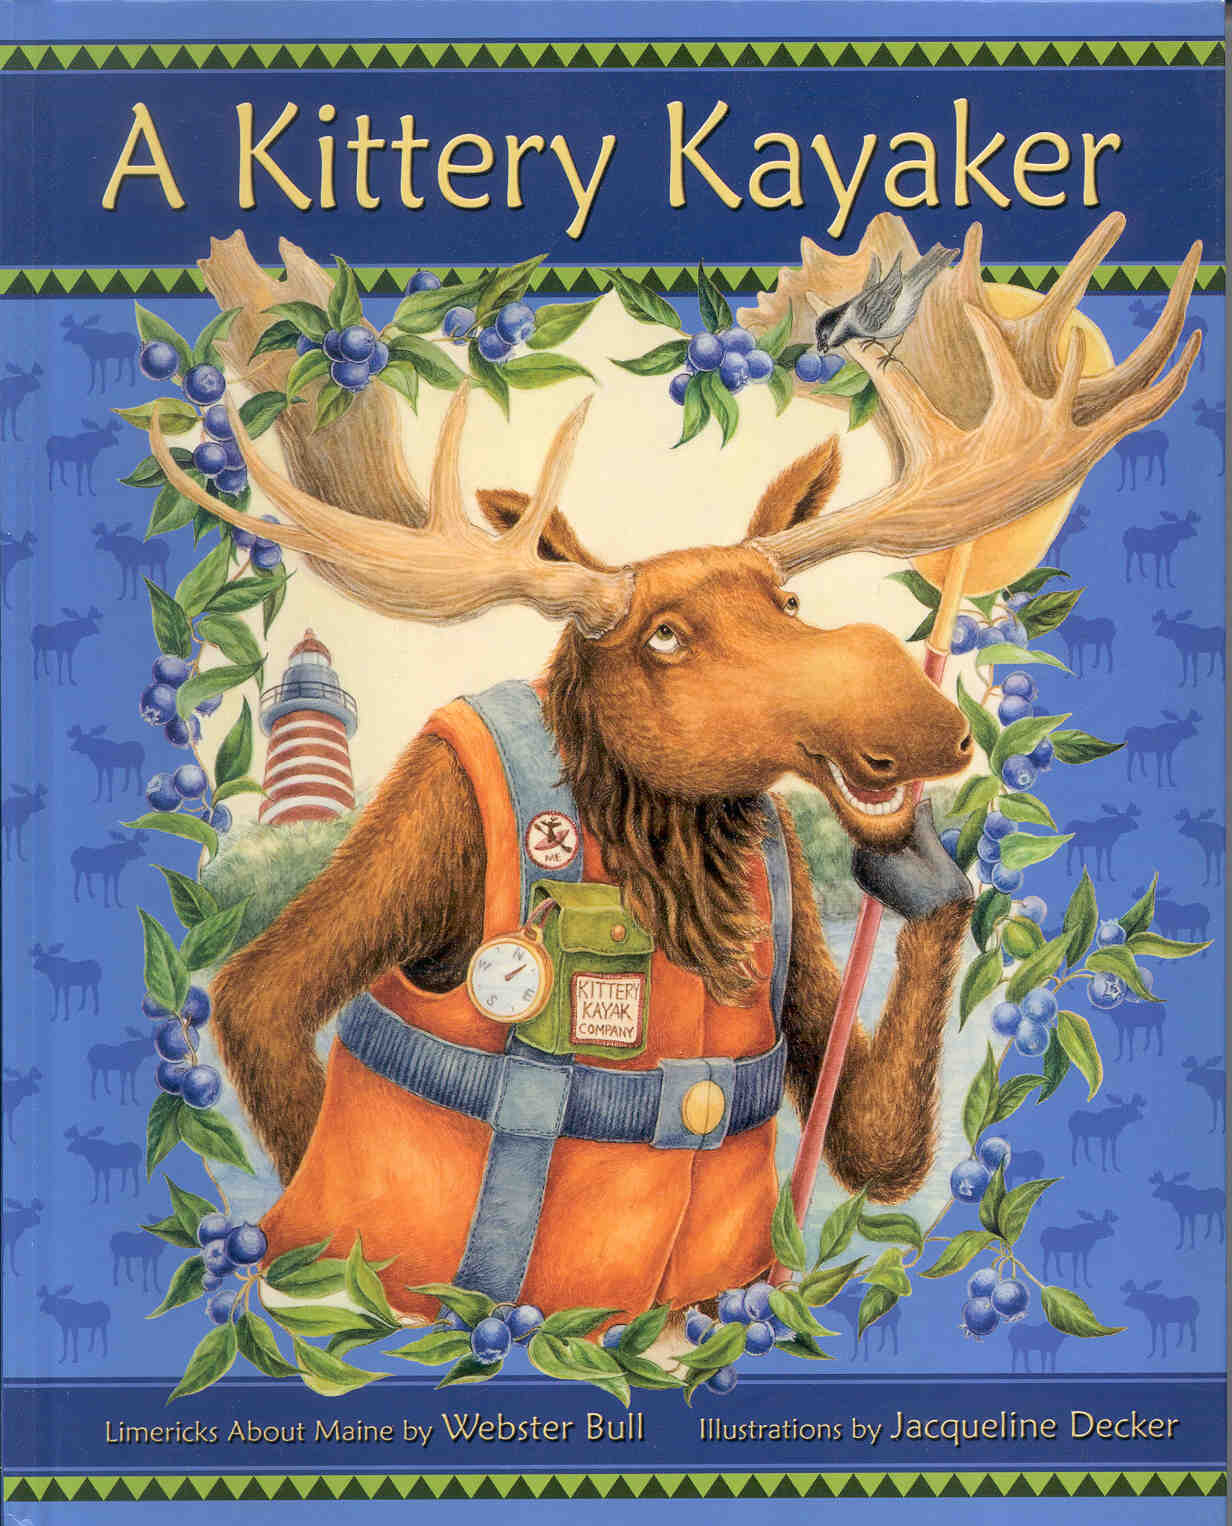 Image of the book cover A Kittery Kayaker